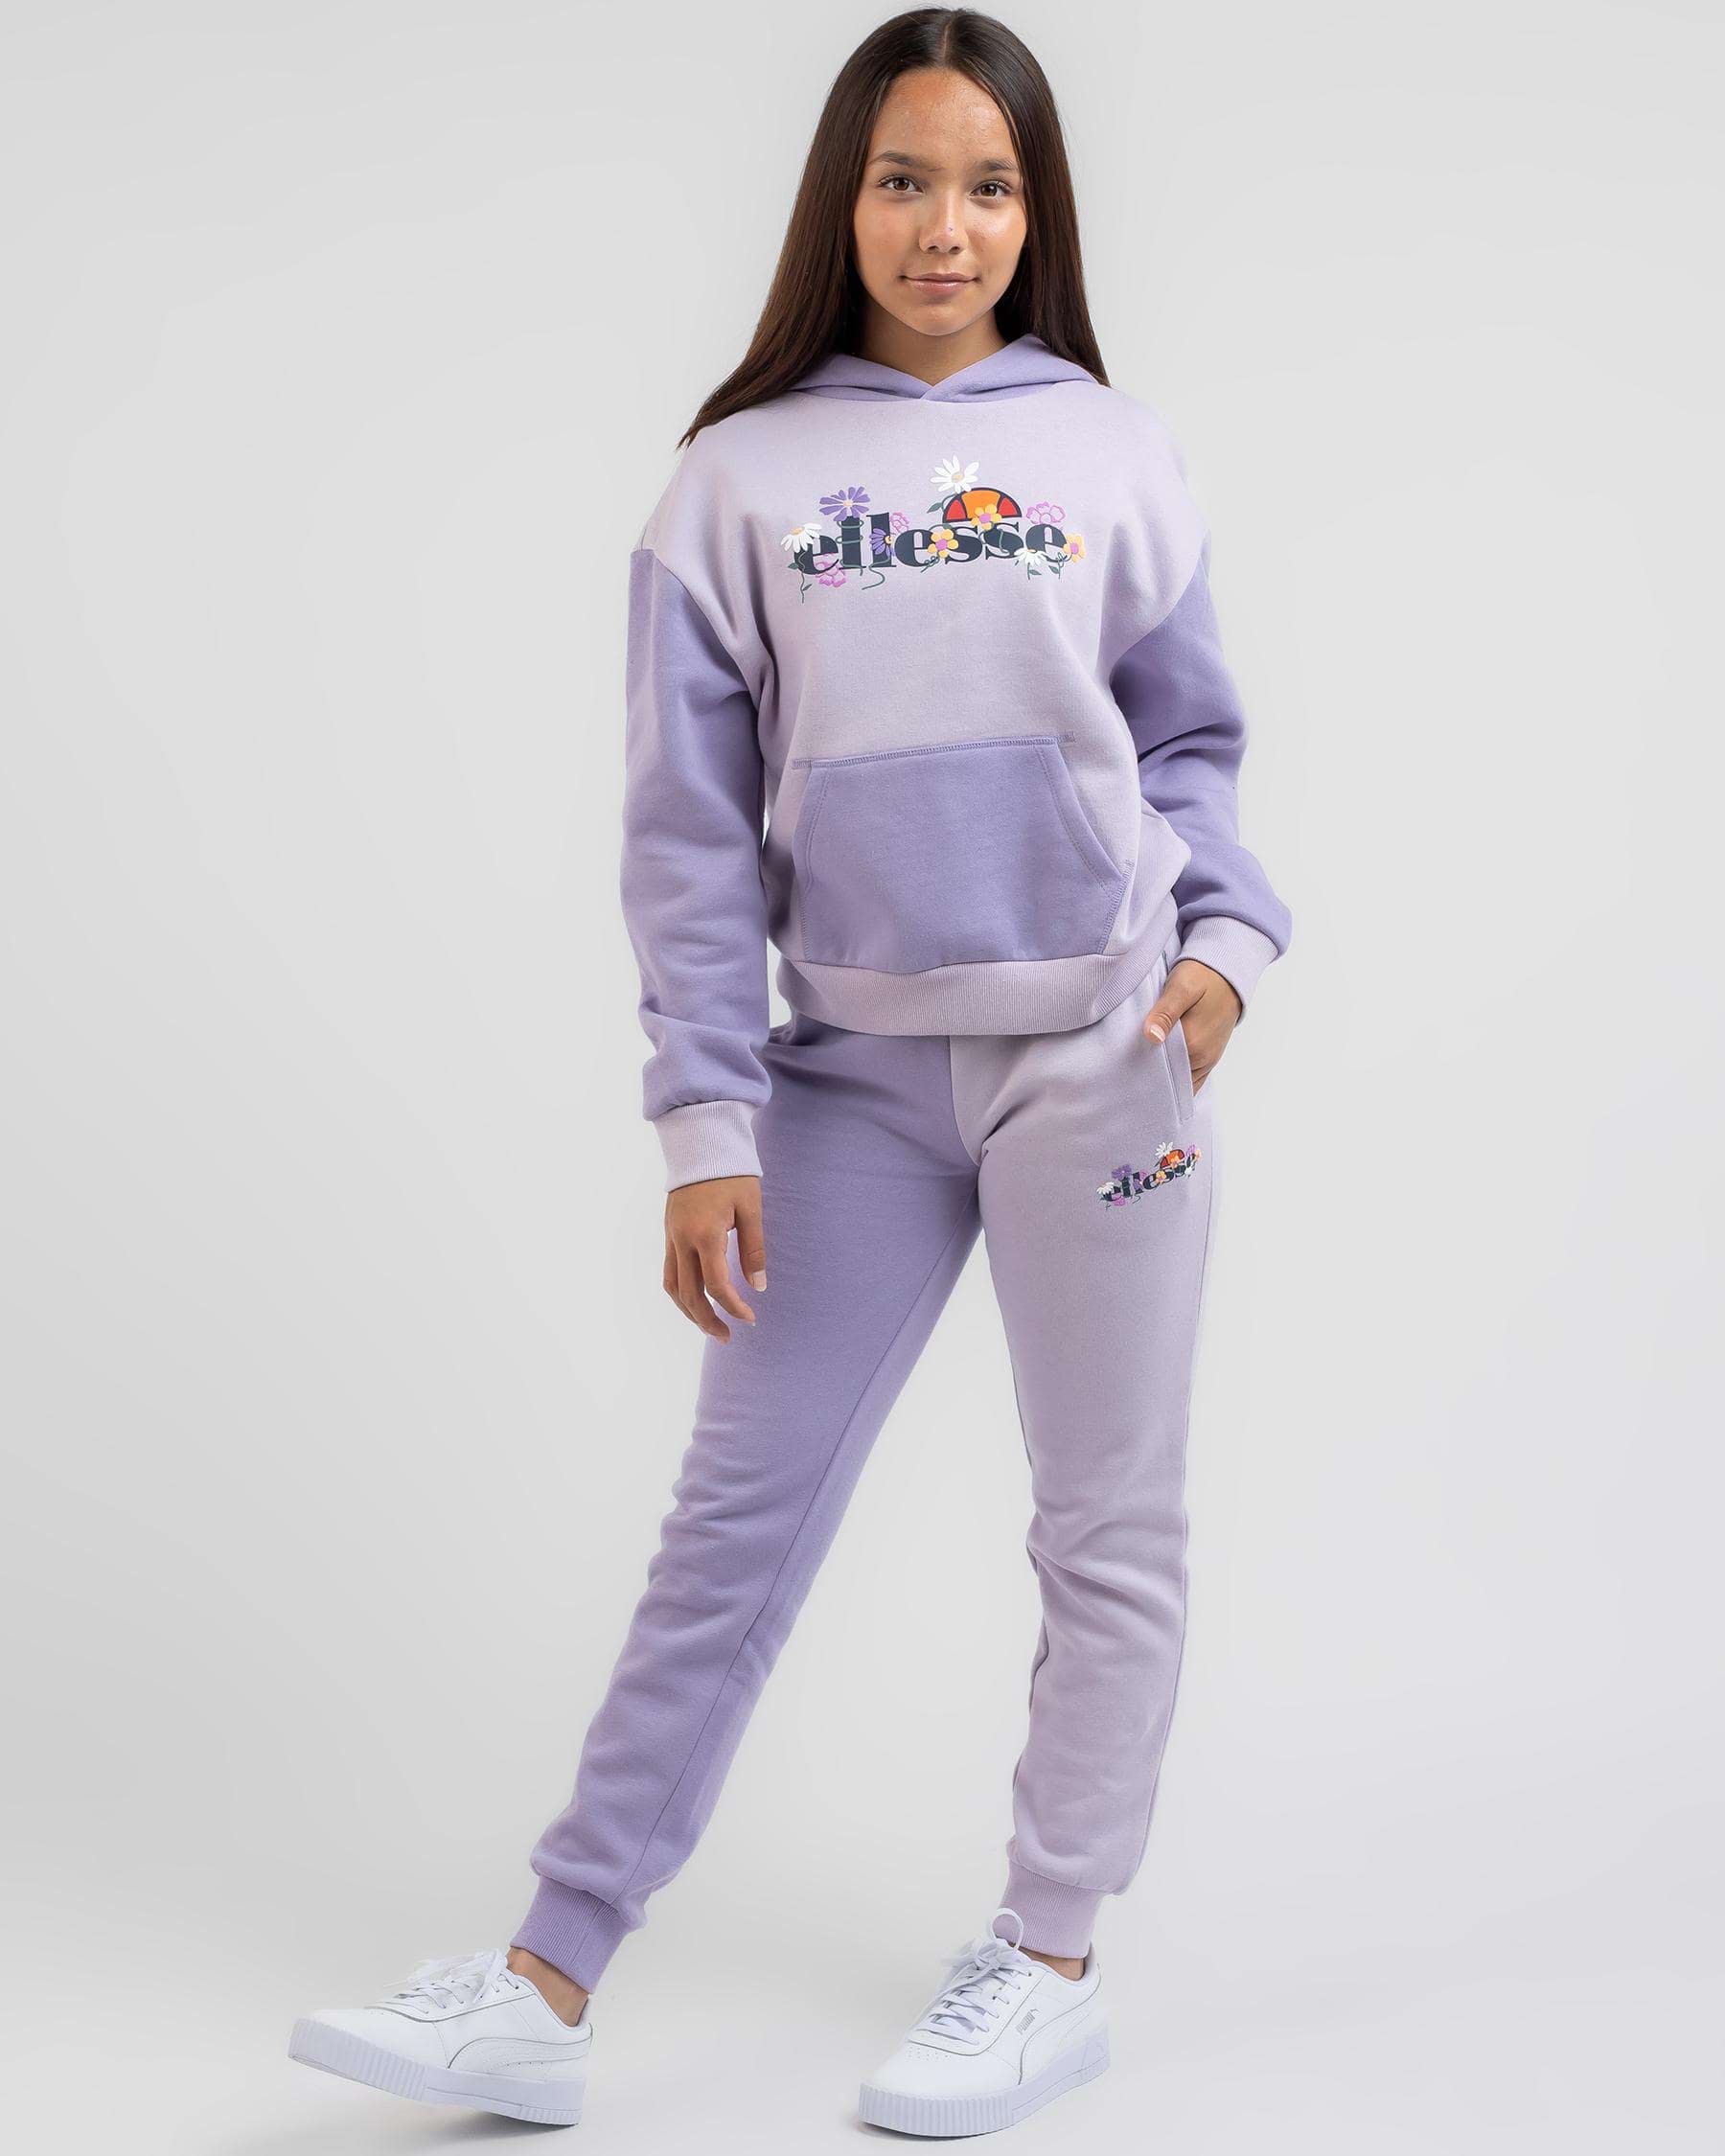 Ellesse Girls' Soli Track Pants In Purple - Fast Shipping & Easy ...